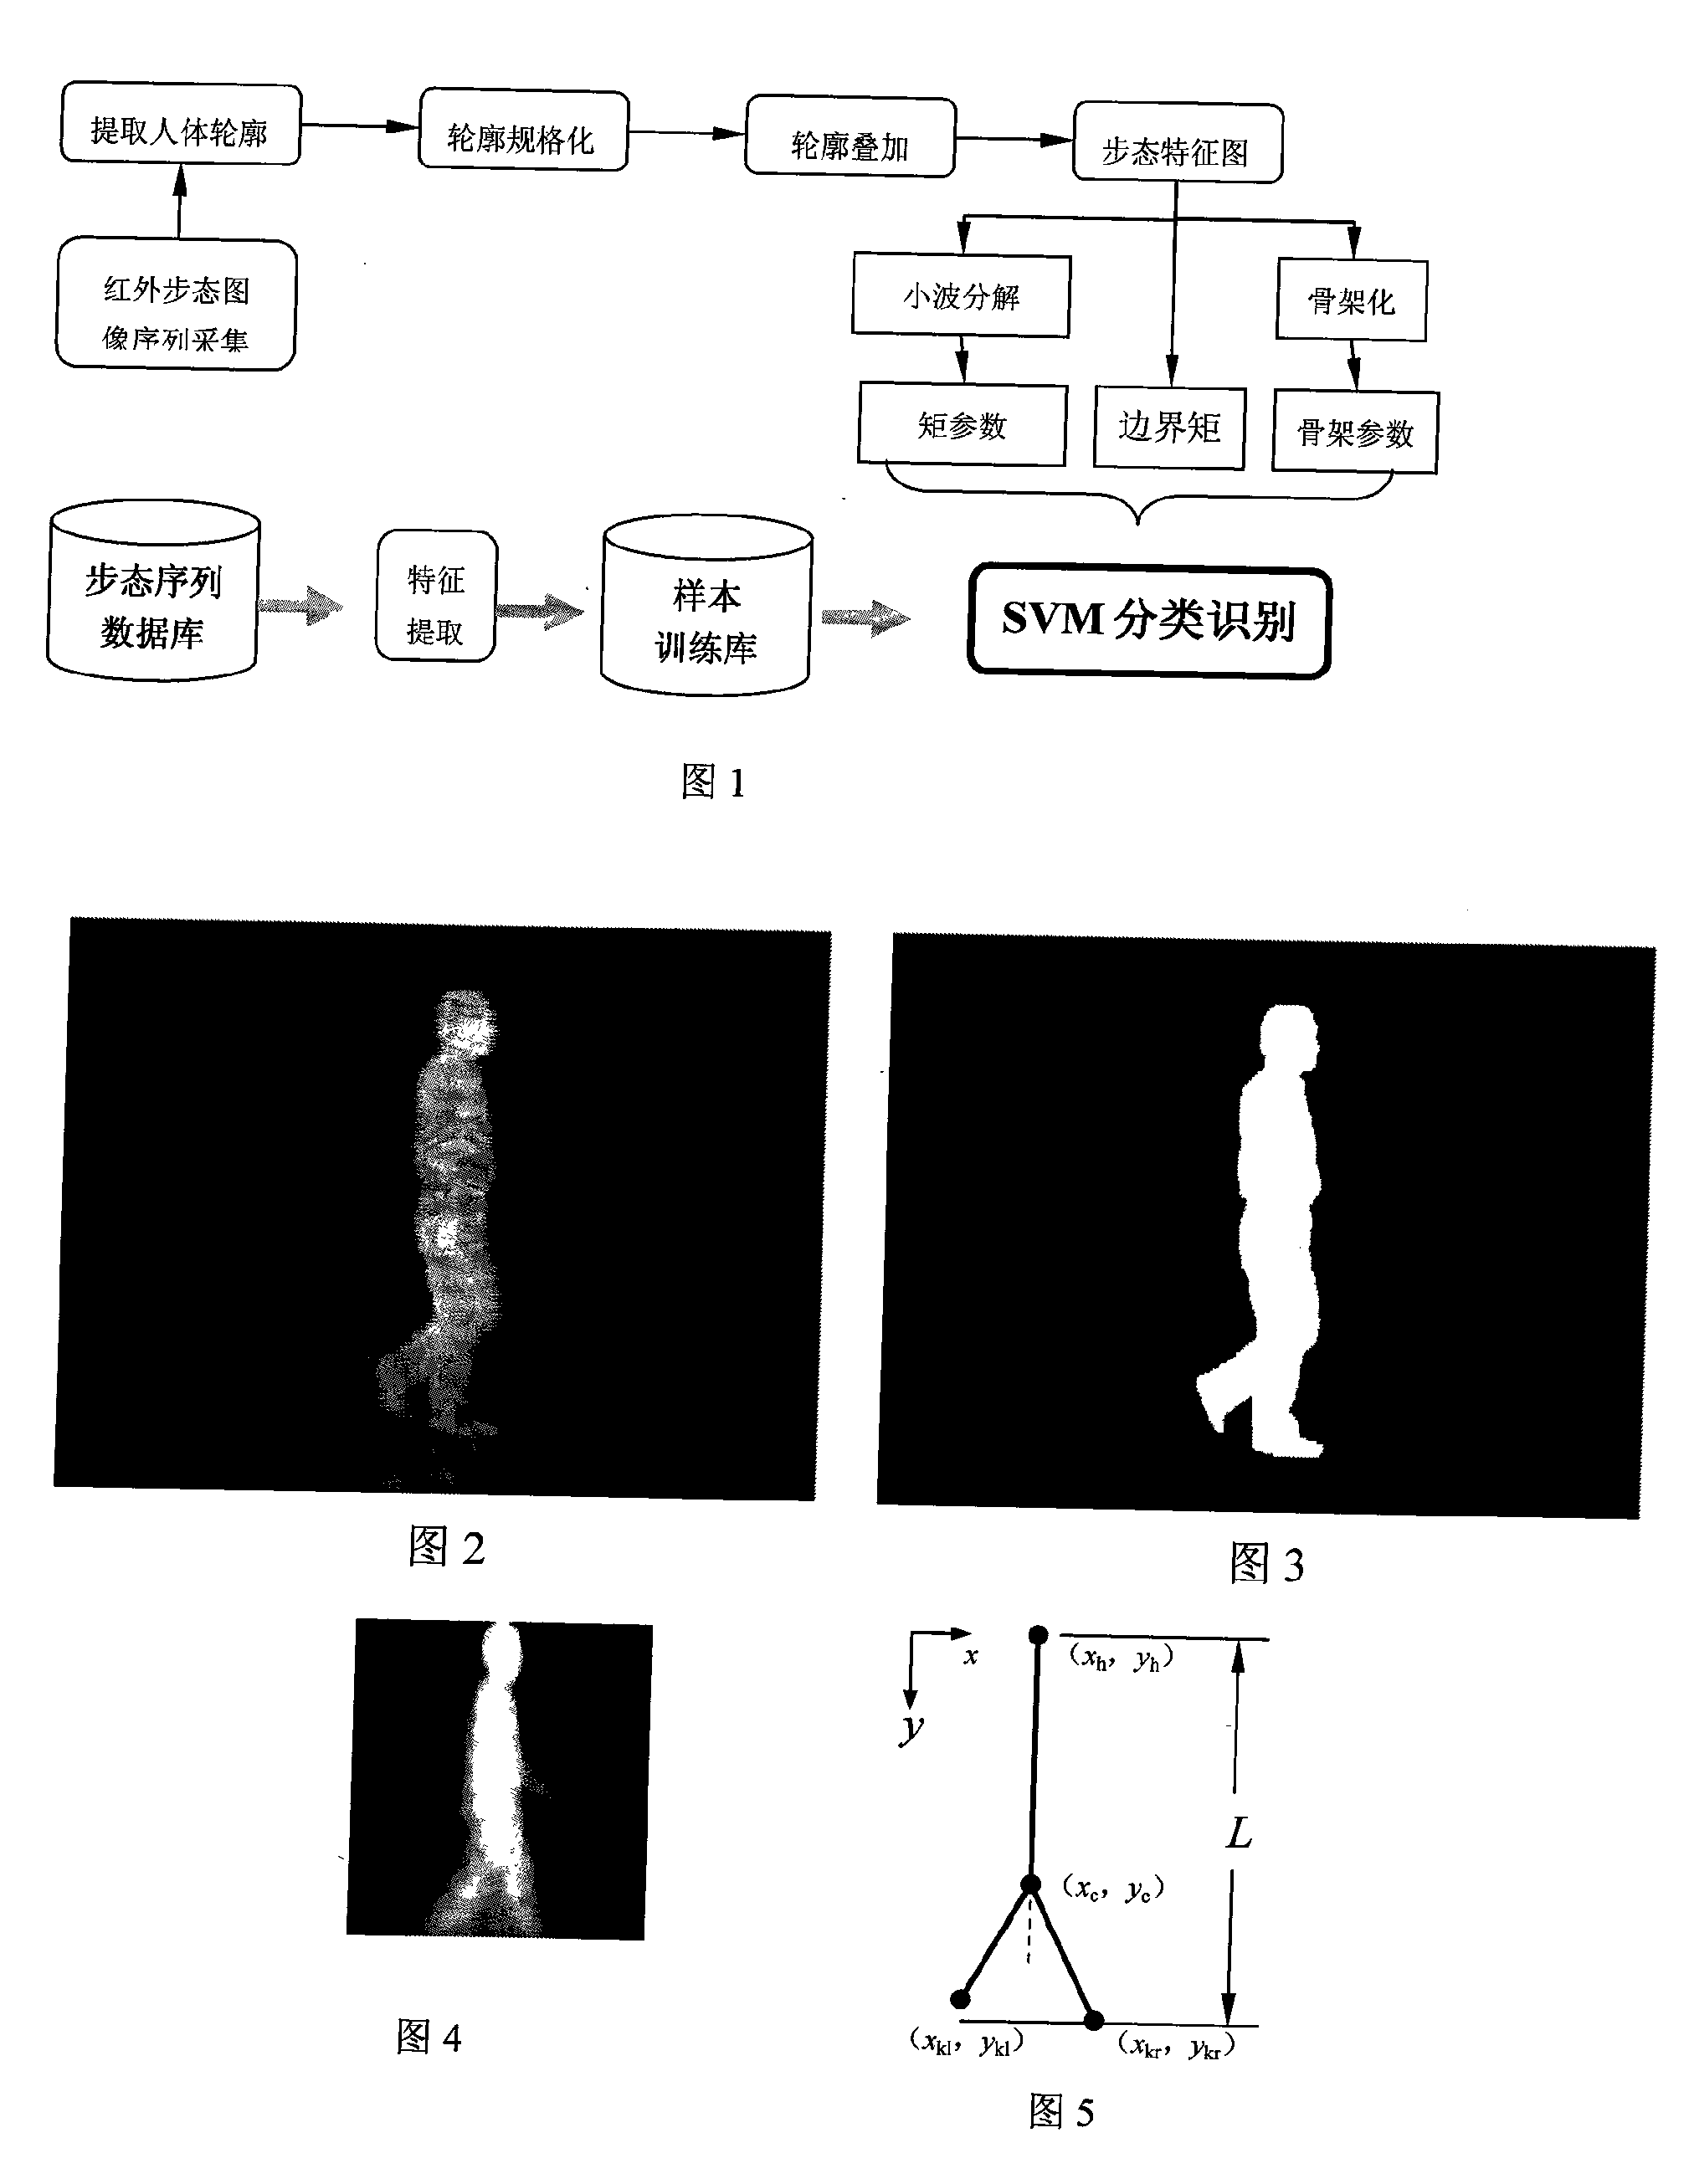 Gait recognizing method and gait feature abstracting method based on infrared thermal imaging